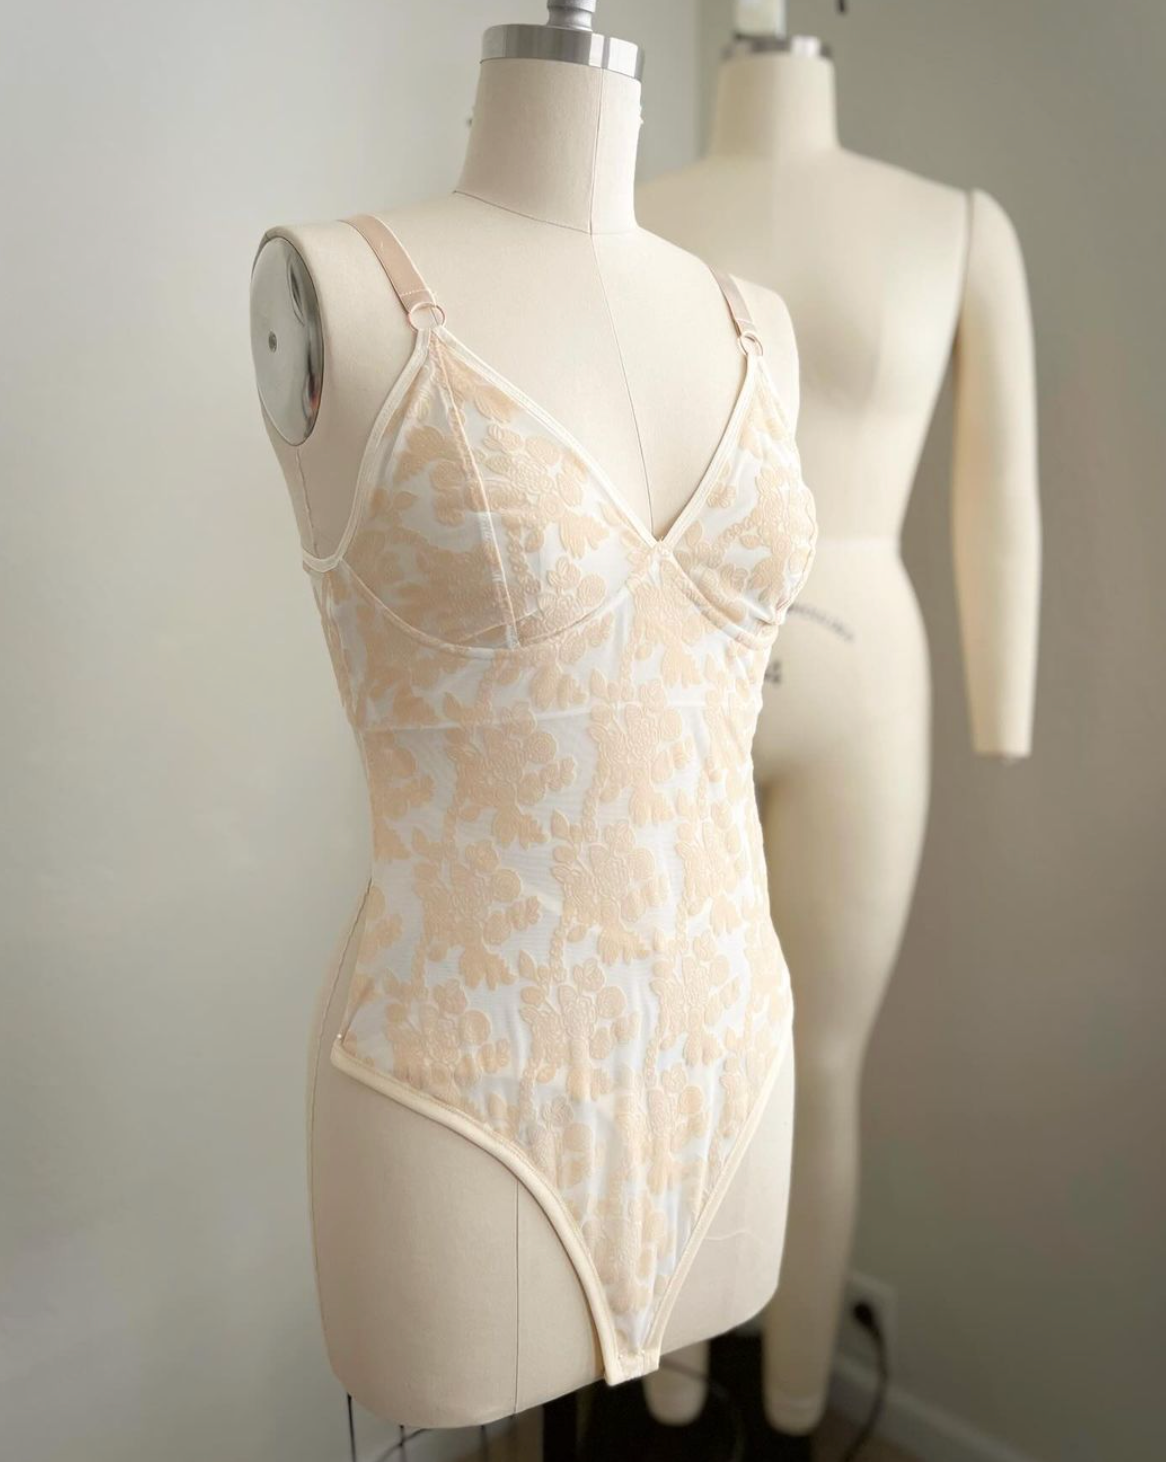 Rubies Custom Bras: Custom Bodysuit in Beige Velvet Mesh Front Shot. Made to measure and made to order. Available in various colours and fabrics. Bespoke and made in Canada and the USA by bra design experts.